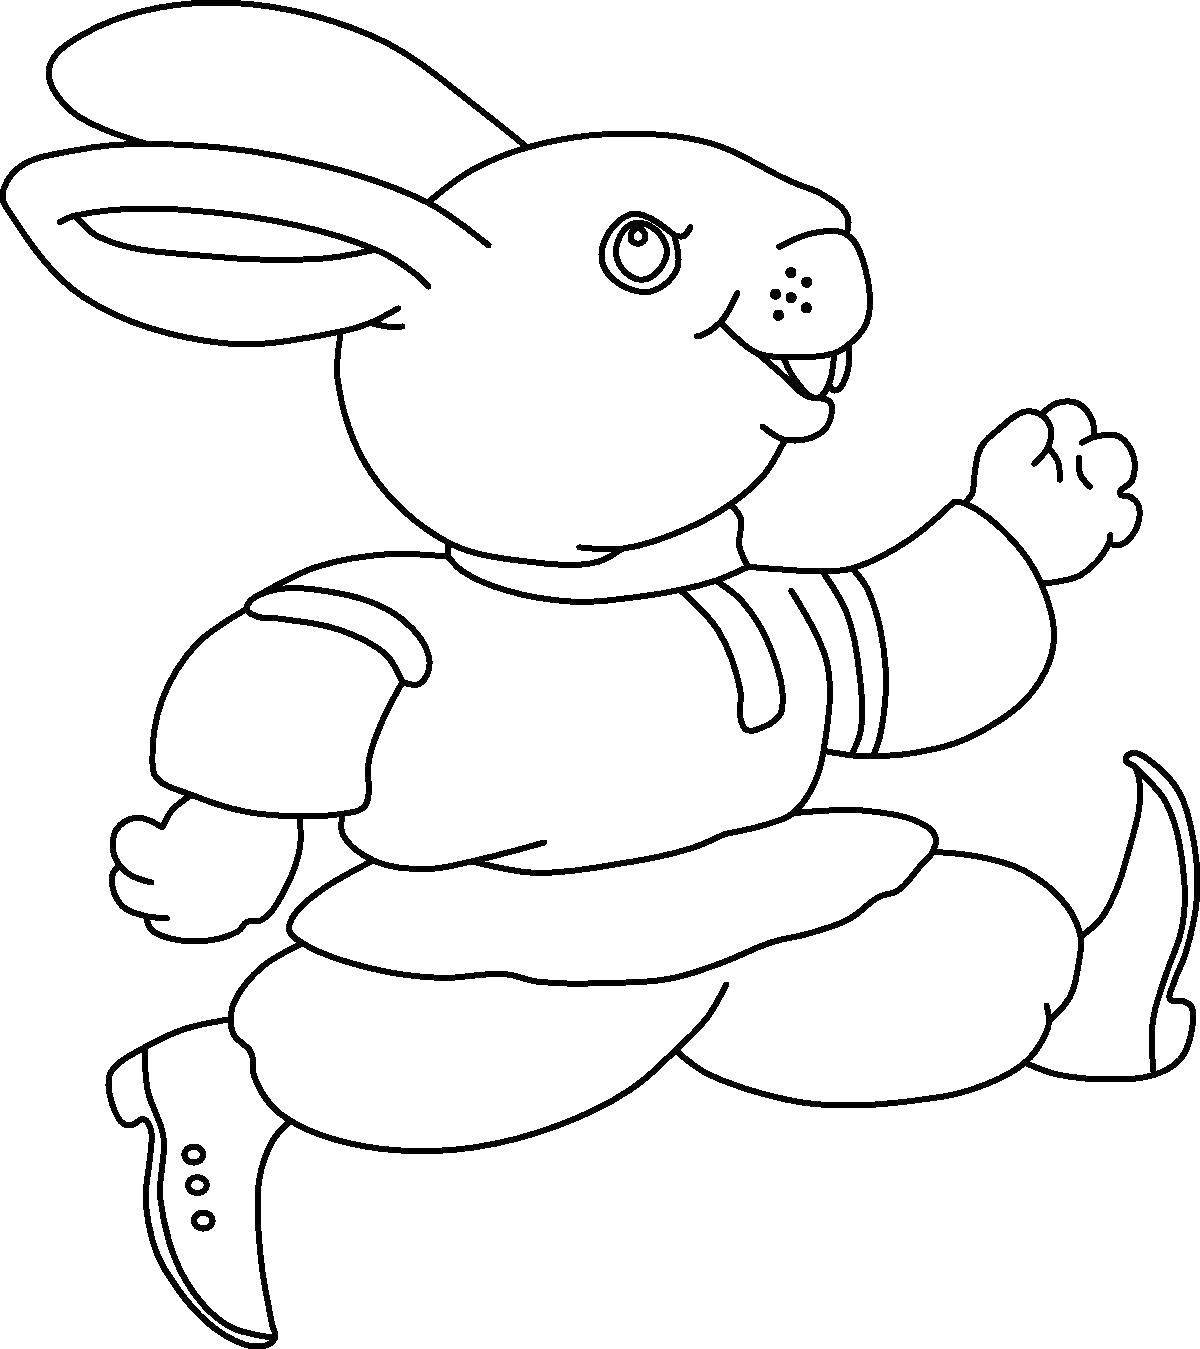 Coloring Funny Bunny. Category Coloring pages for kids. Tags:  Animals, Bunny.